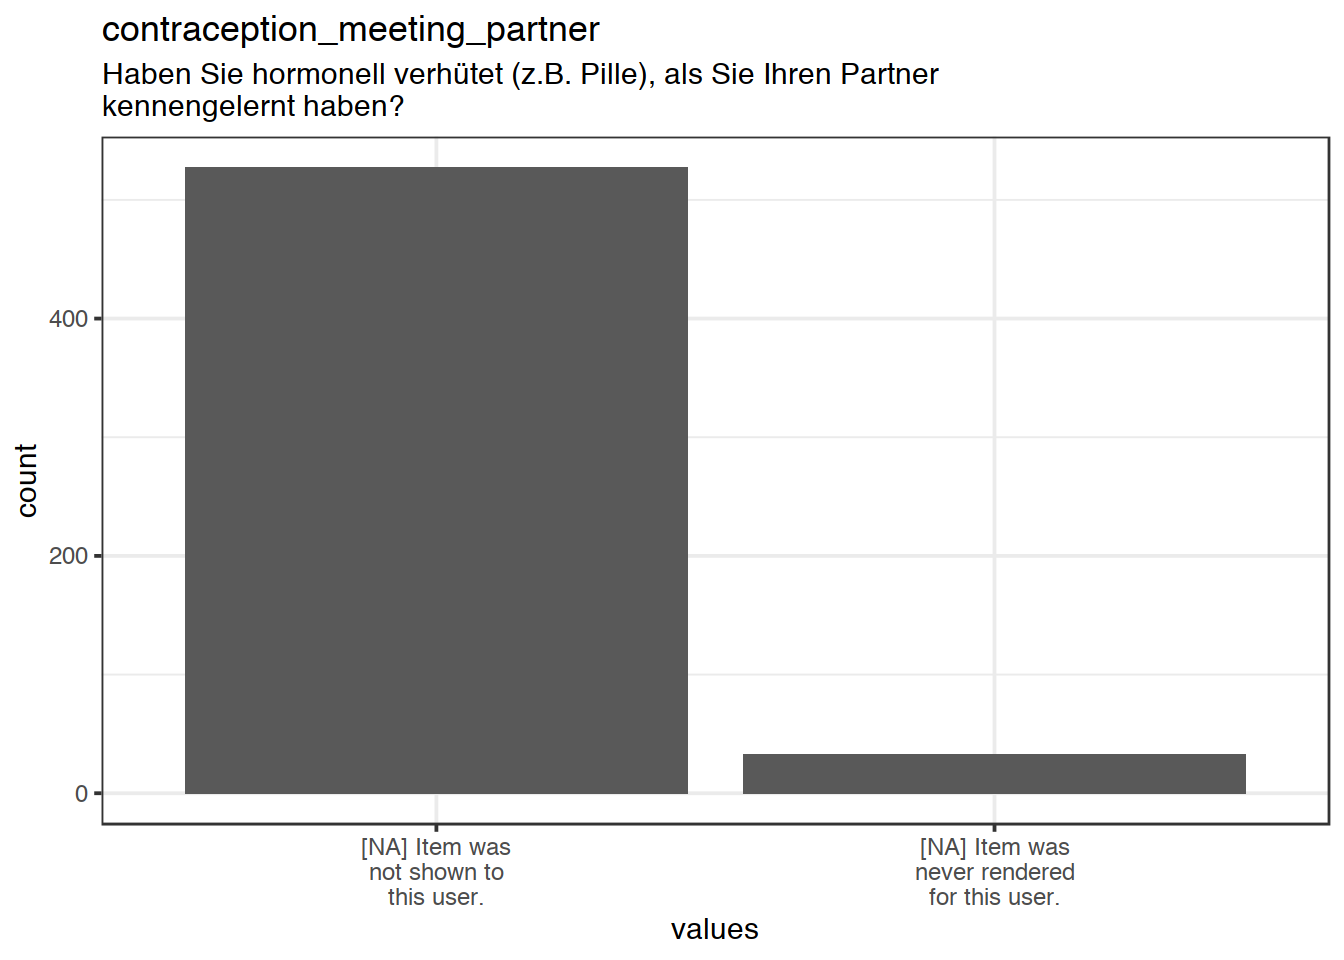 Plot of missing values for contraception_meeting_partner